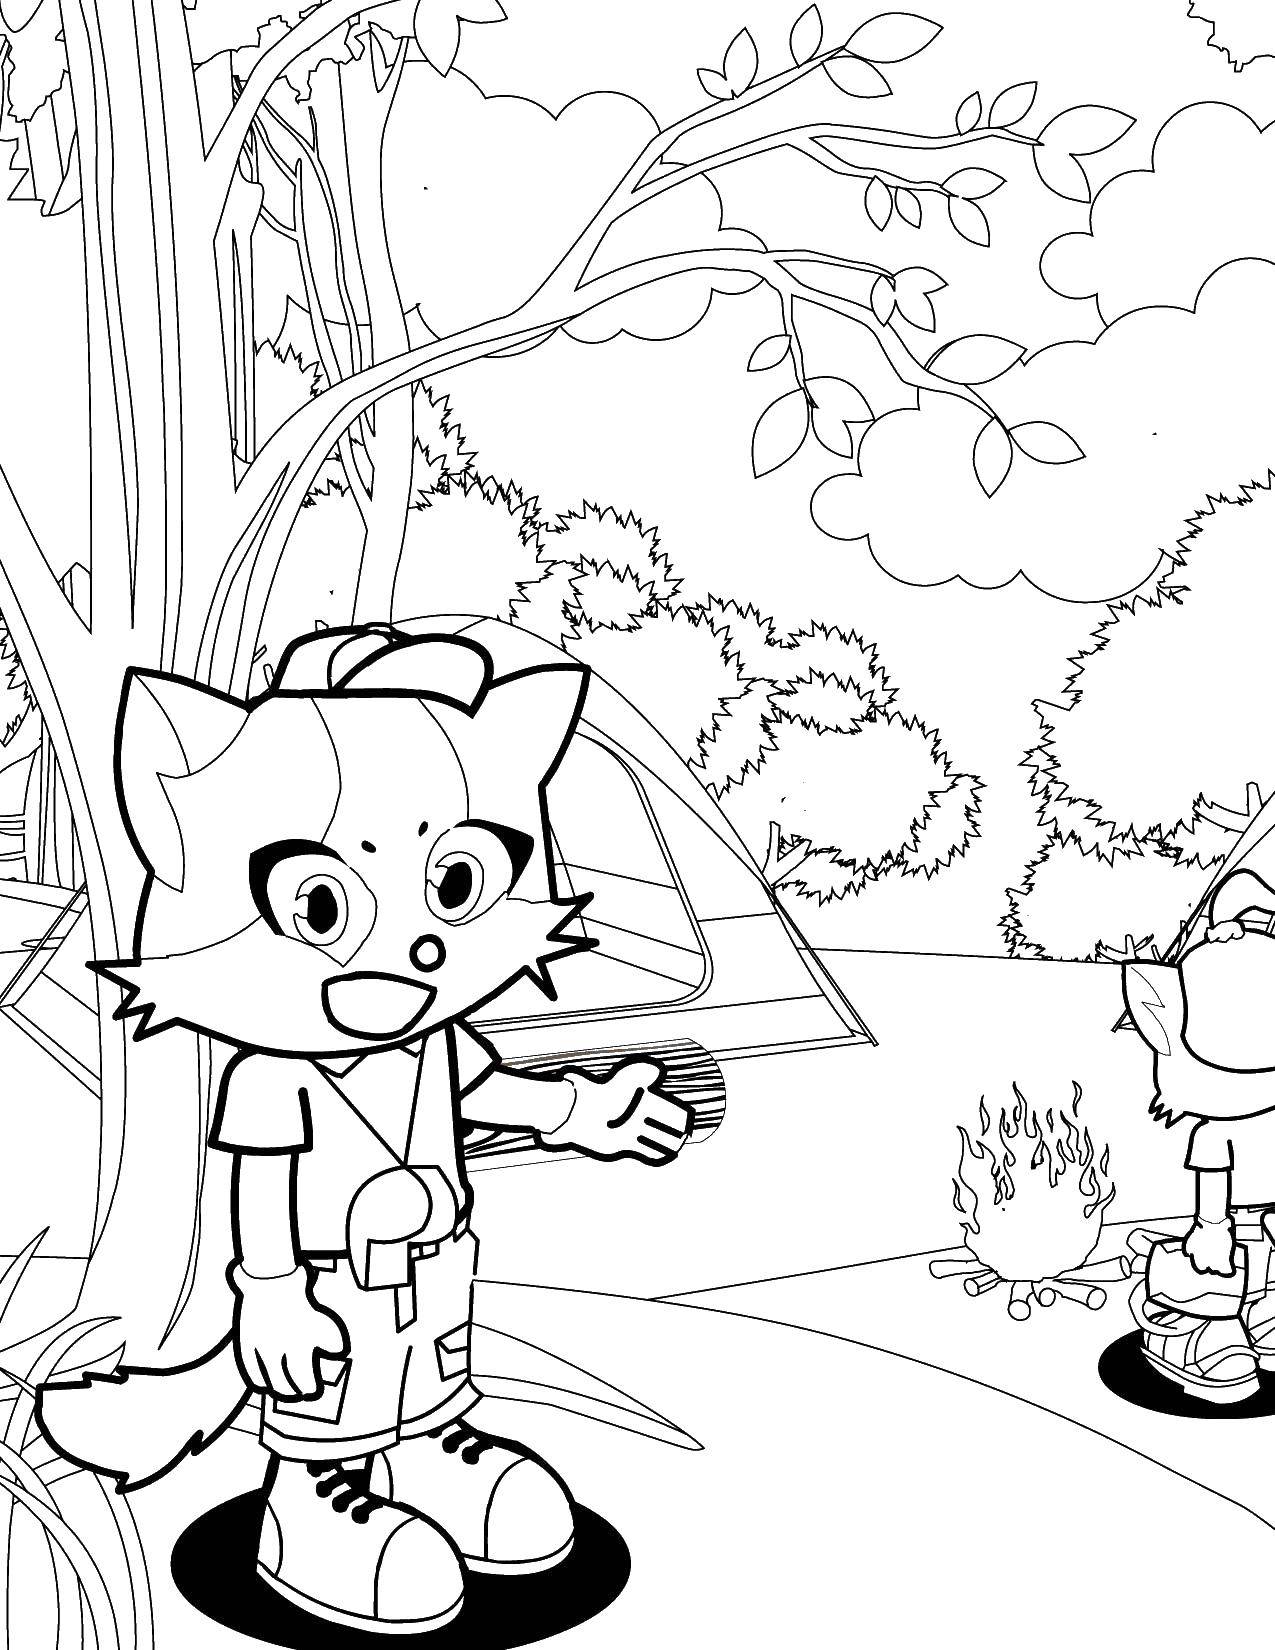 Coloring Cats in the camp. Category Camping. Tags:  vacation, camp, nature.